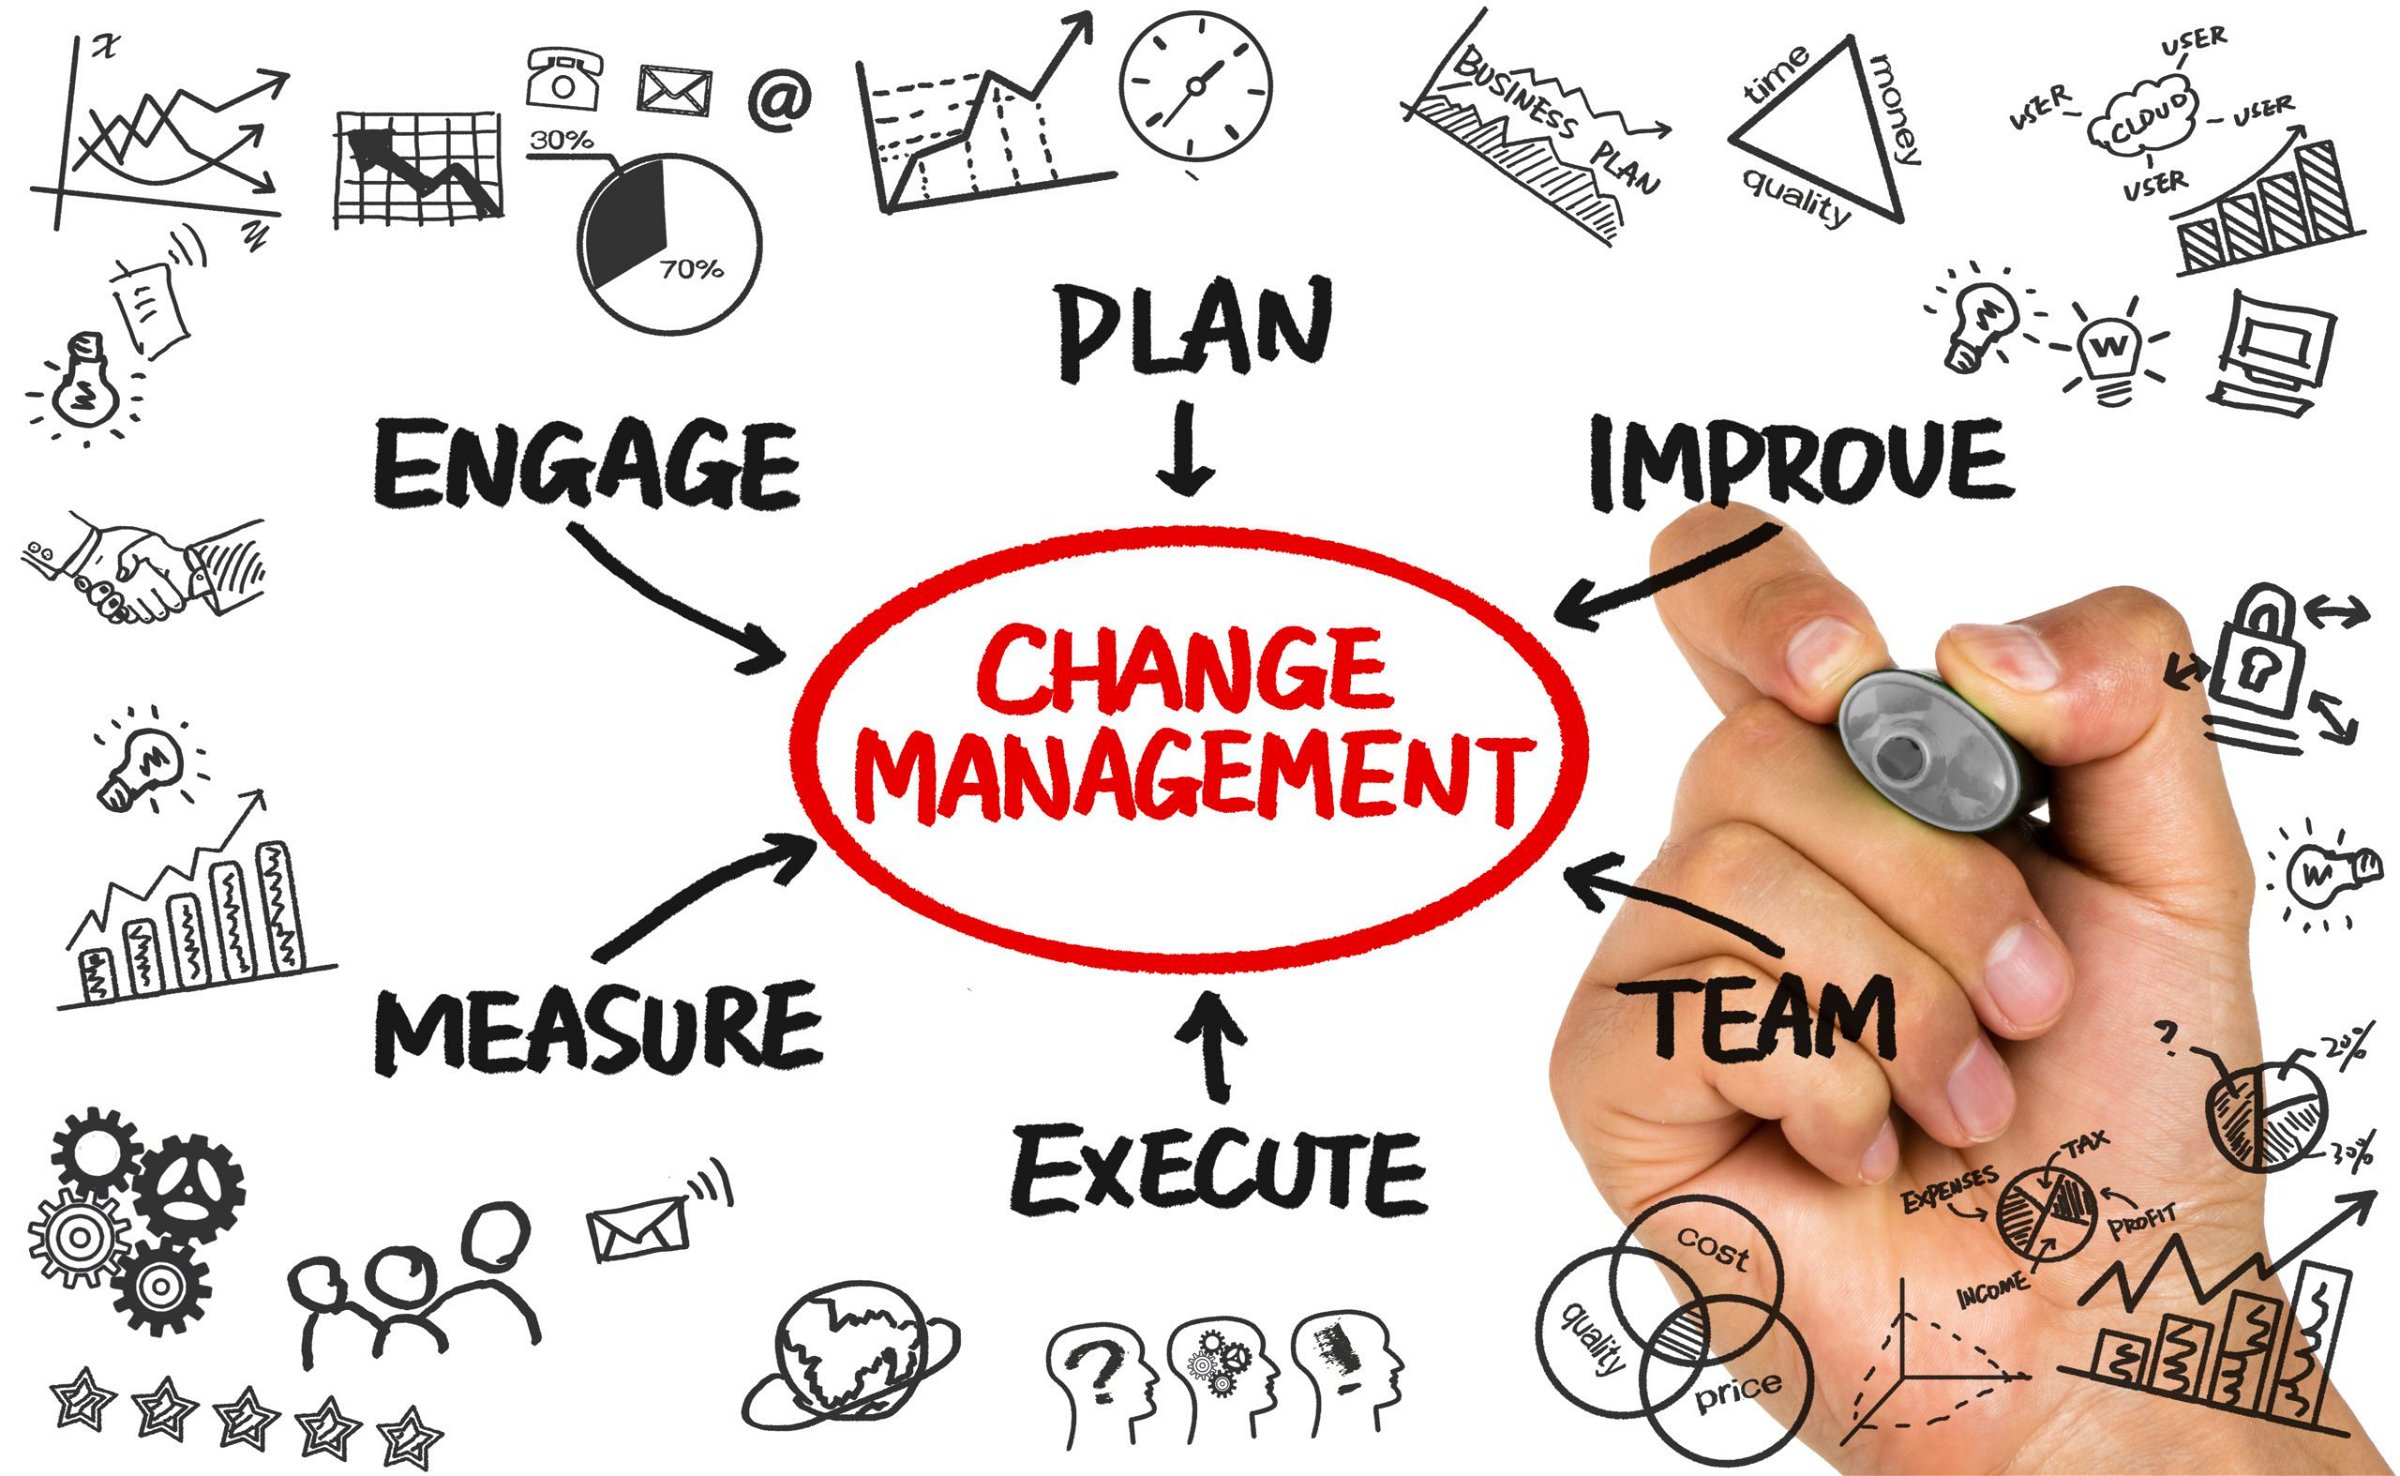 How do I get Certified in Change Management?